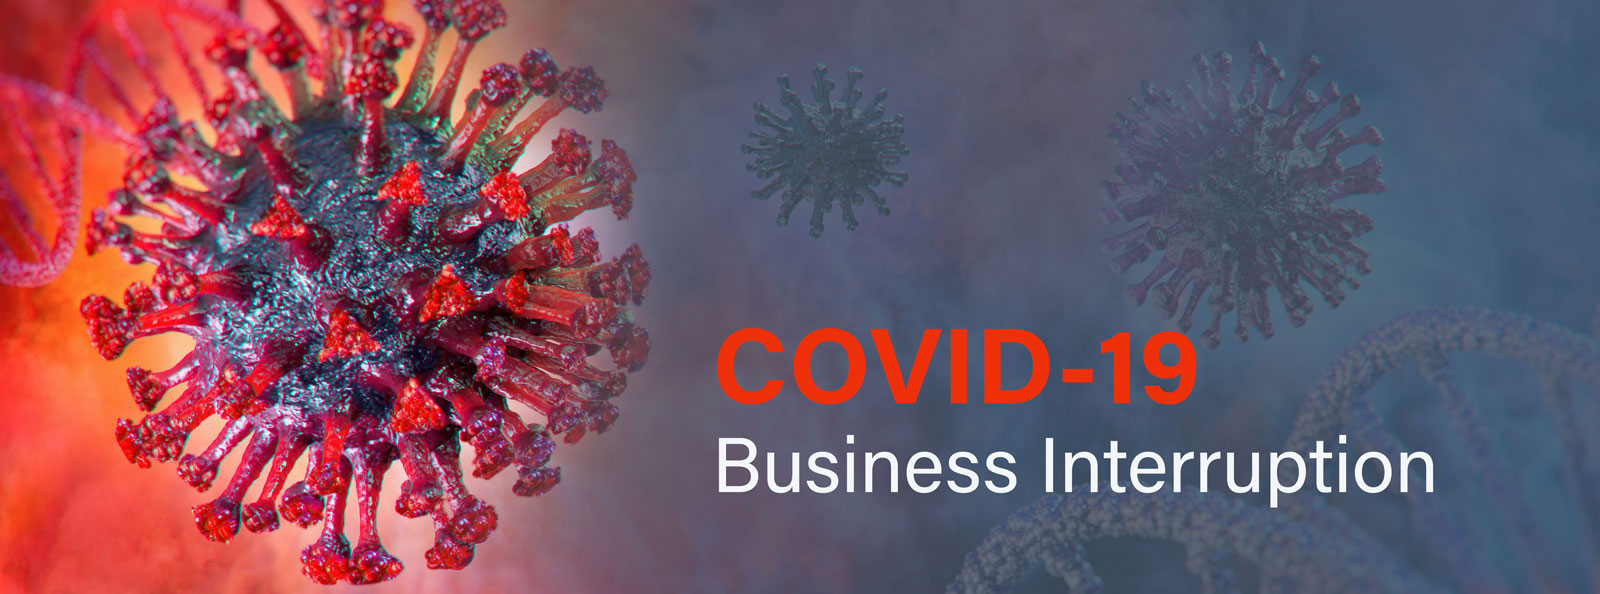 Business Interruption Insurance For Covid 19 Losses Industry Today